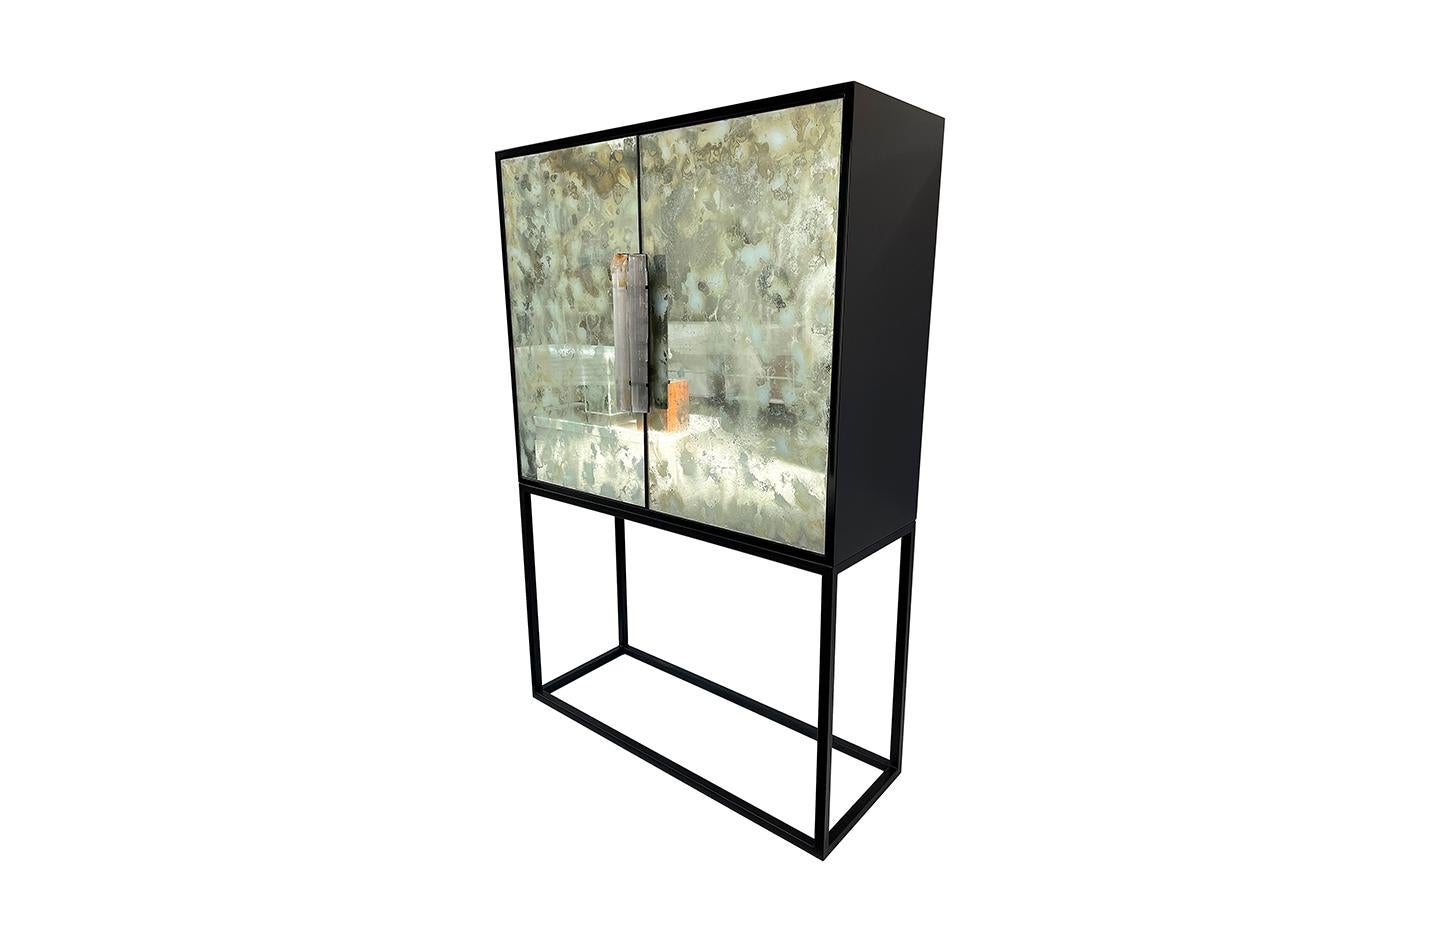 This Bar  Cabinet By Ercole Home stands on a sleek Black Metal Base.
The wood case is in black lacquer, glossy finish. 
The interior is in black lacquer, glossy finish.
The two doors are covered by Eglomizee  Hand Painted Mirror in a White Dust,